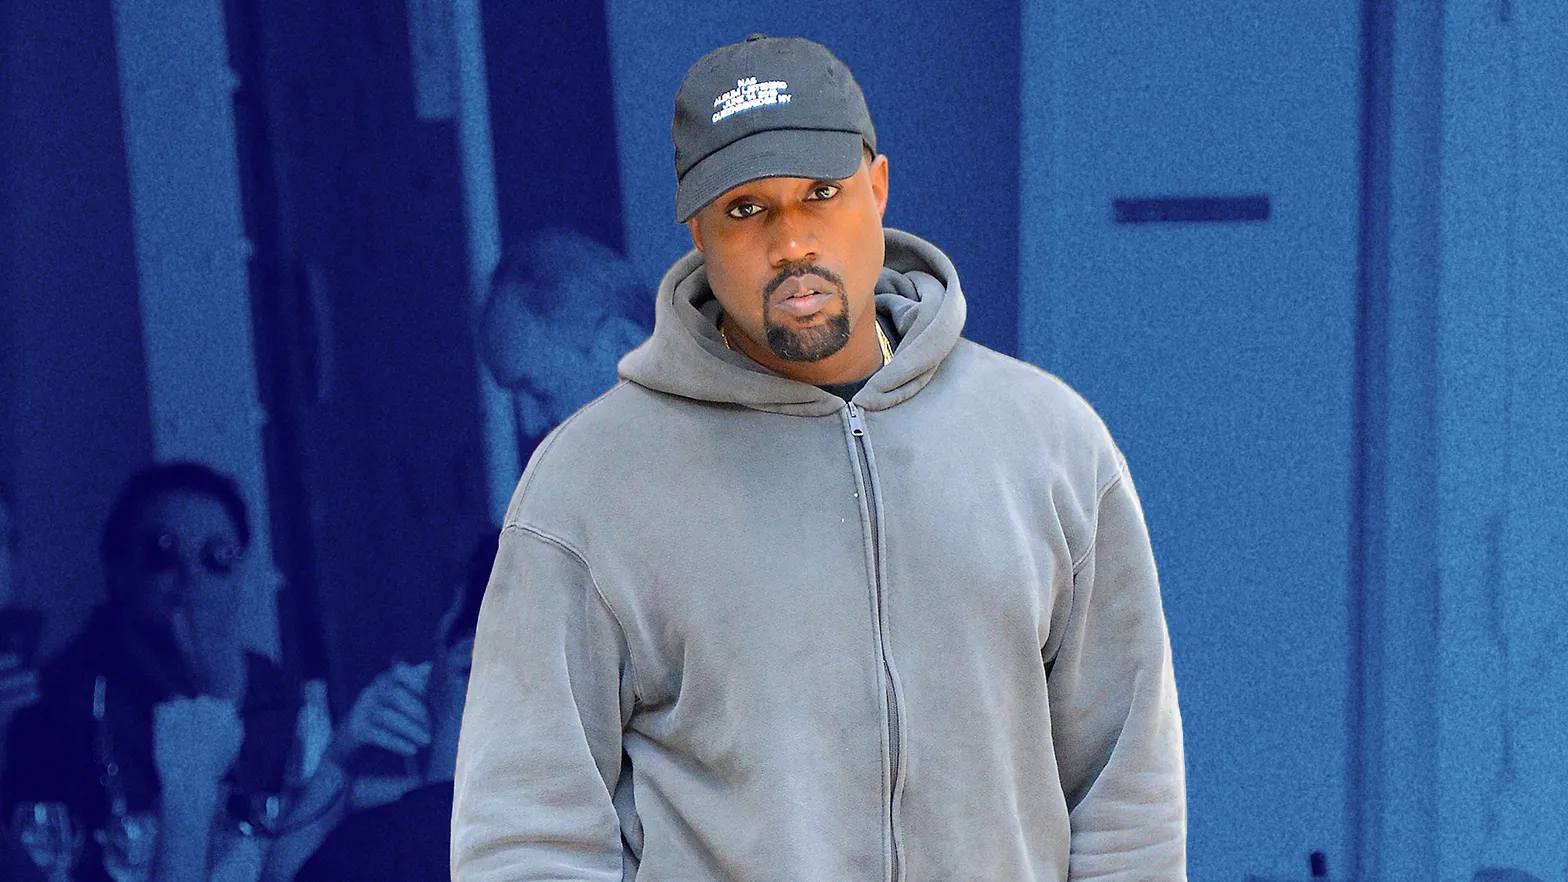 Kanye West Hoodies Changed Fashion Forever